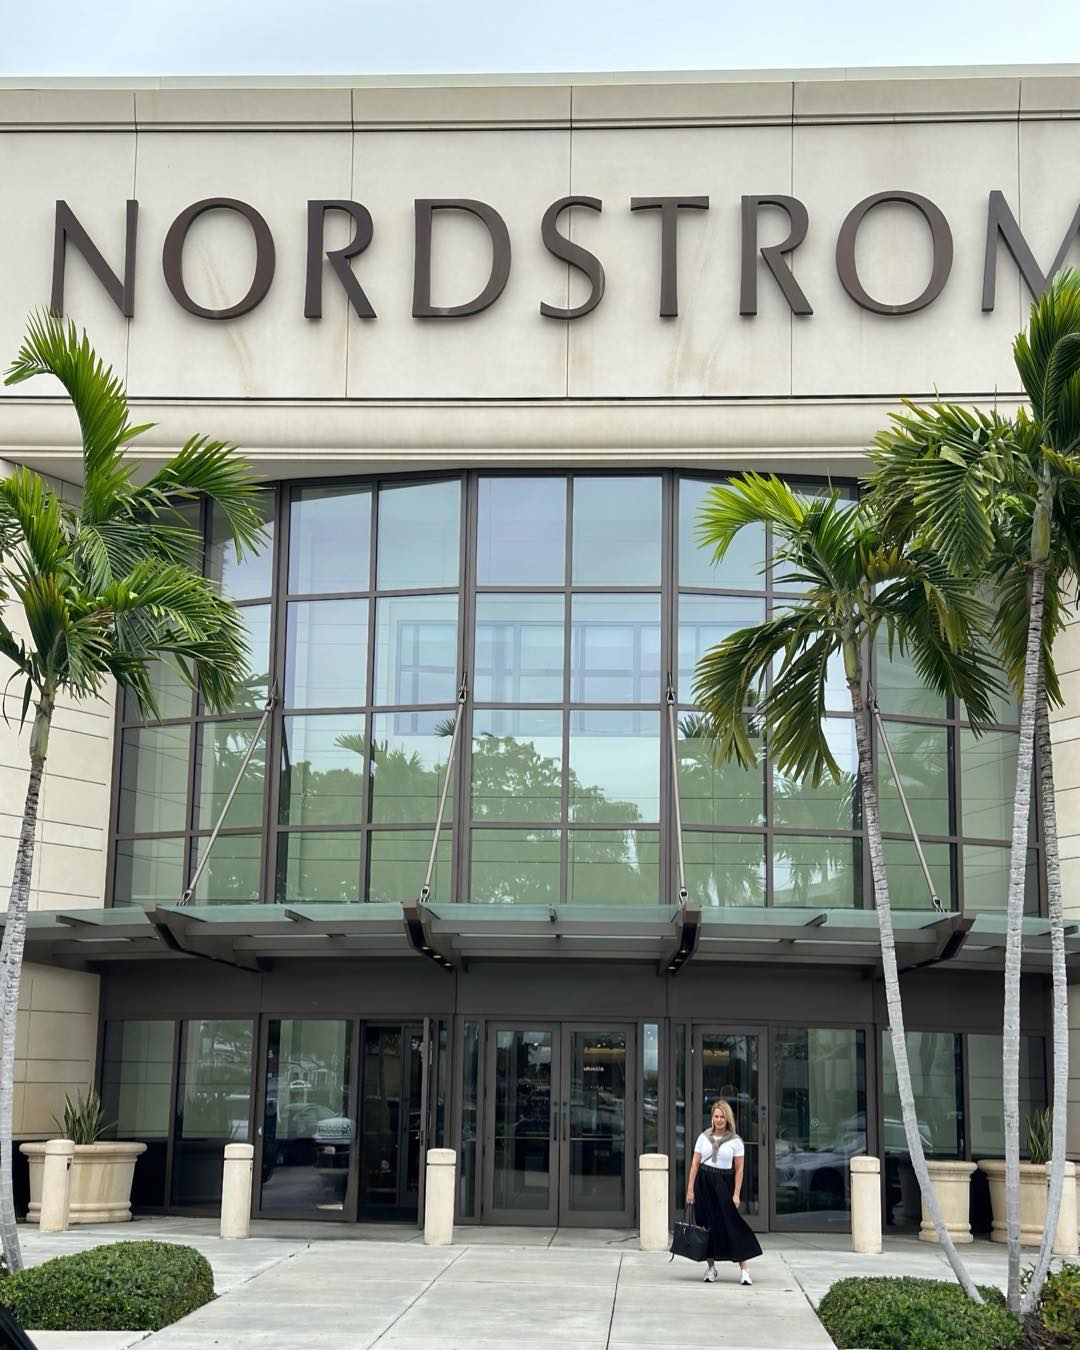 16 Outfit Ideas From My Nordstrom Aventura Try On